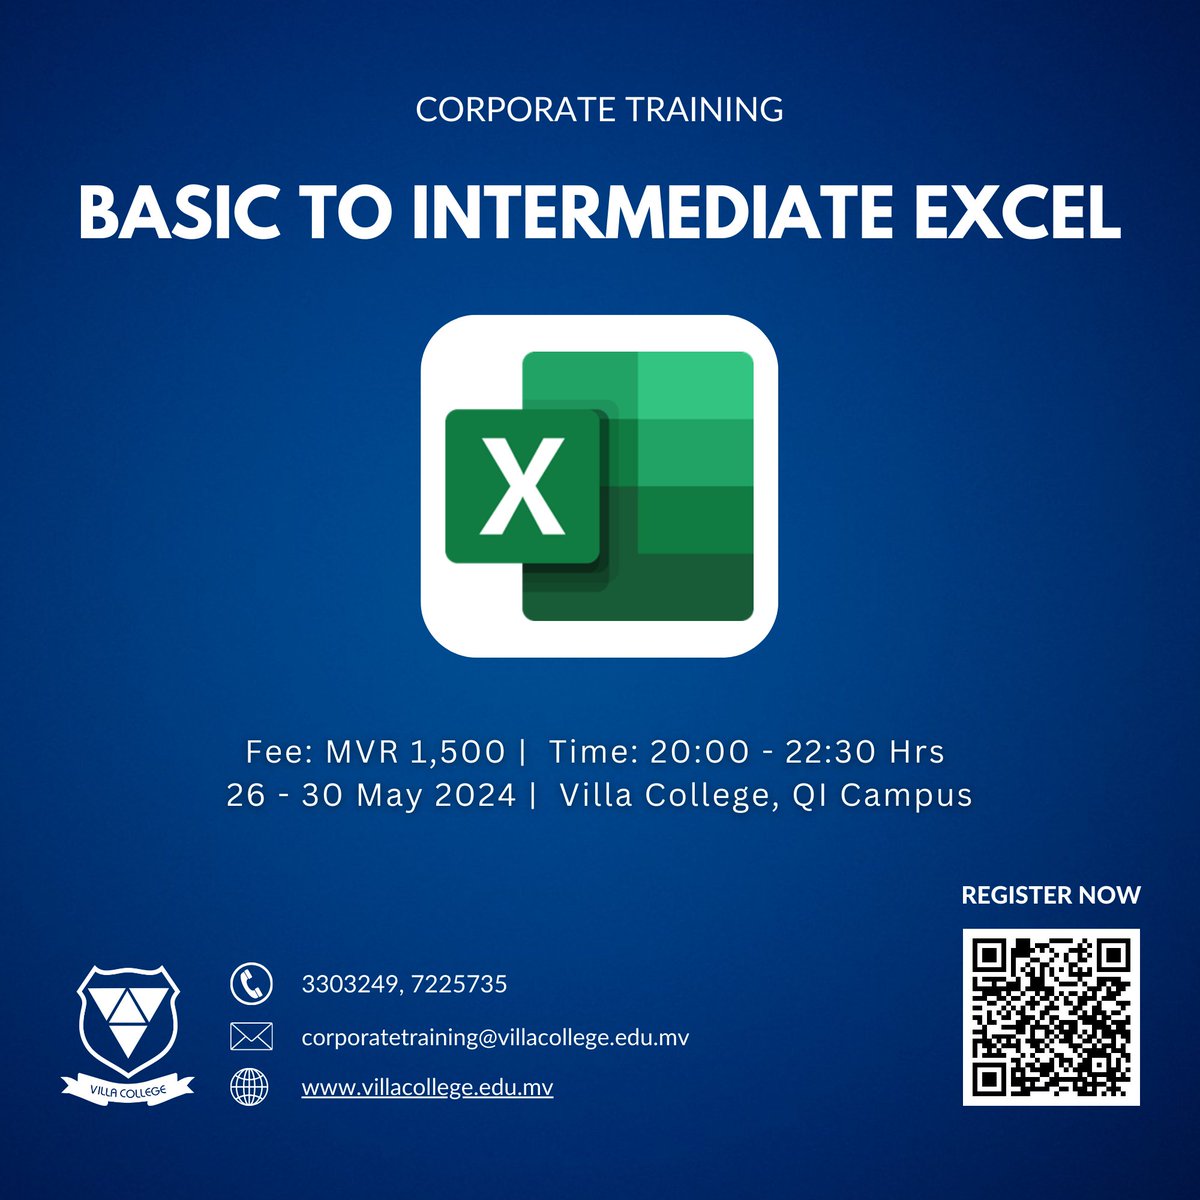 Corporate Training → Basic to Intermediate Excel. Become more confident and efficient at work by completing our 12-hour training programme in Microsoft Excel. Date: 26 - 30 May 2024 Time: 20:00 - 22:30 Hrs Venue: Villa College Qi Villa College Mahibadhoo Campus Register now…